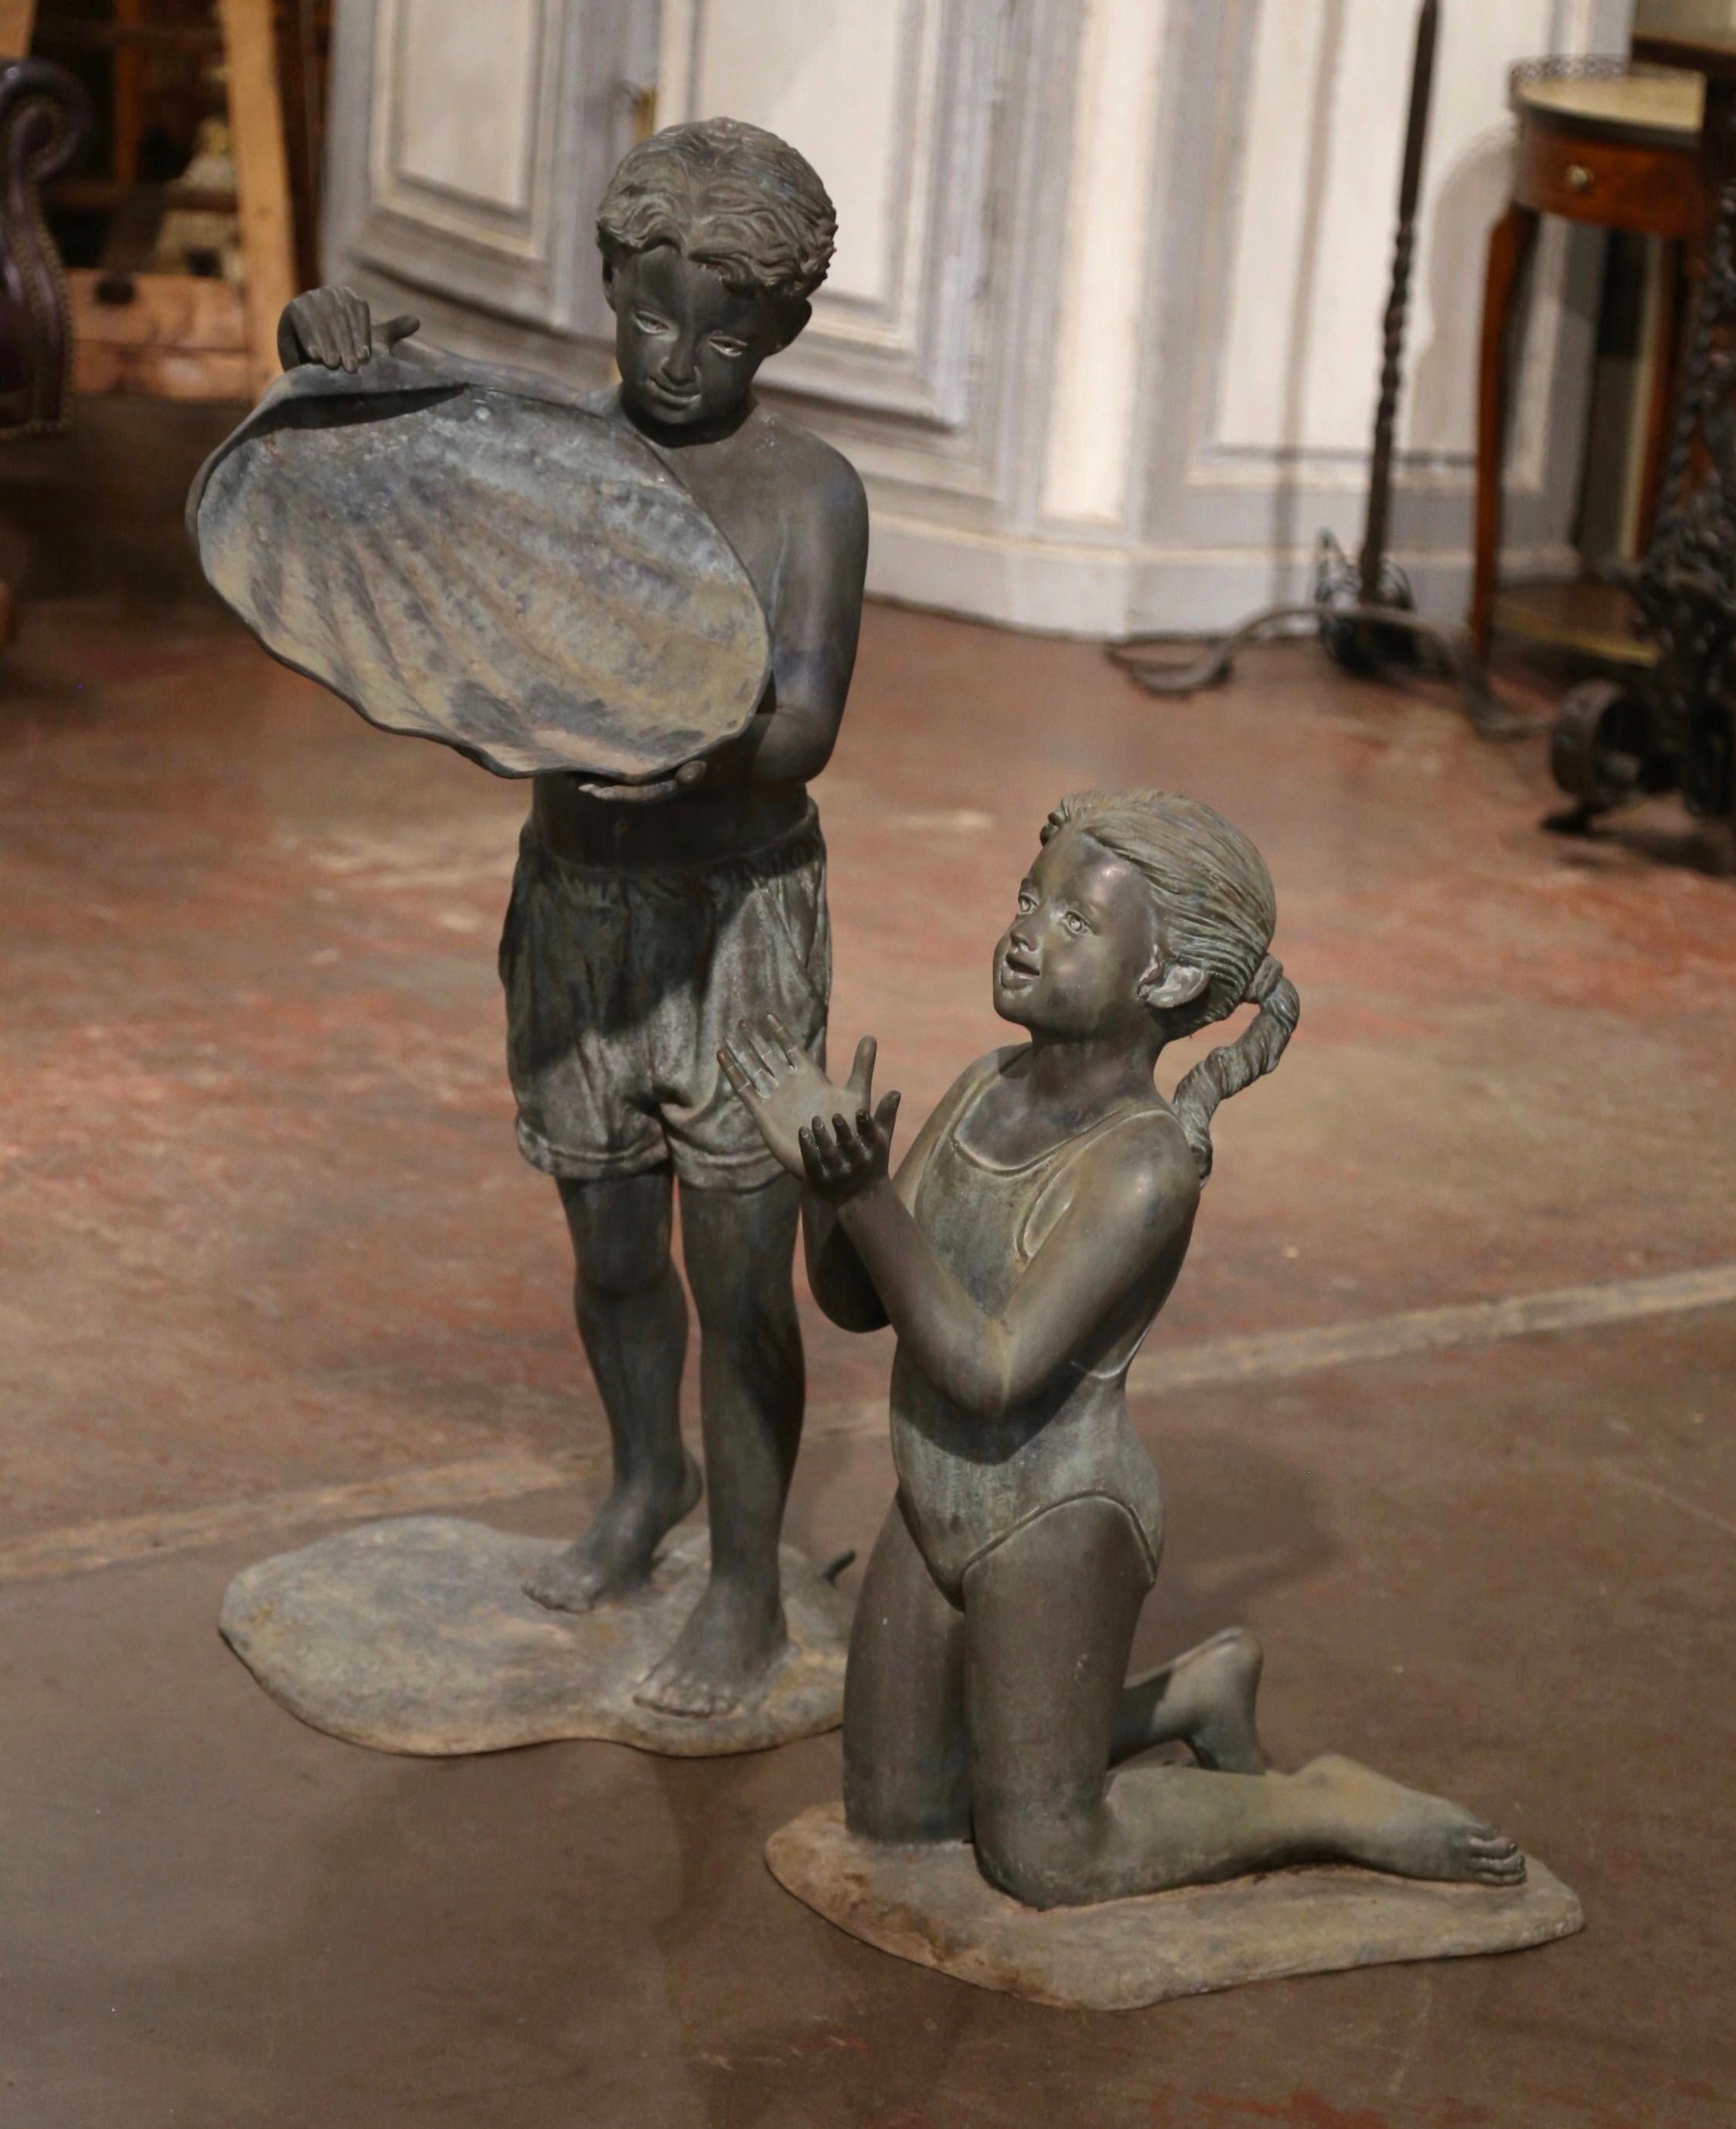 This elegant outdoor fountain was crafted in America, circa 1980. Made of bronze and built in two pieces, the fountain features a boy lifting a shell to pour water on the girl below. Both figures are dressed in bathing suits, ready for a fun day in